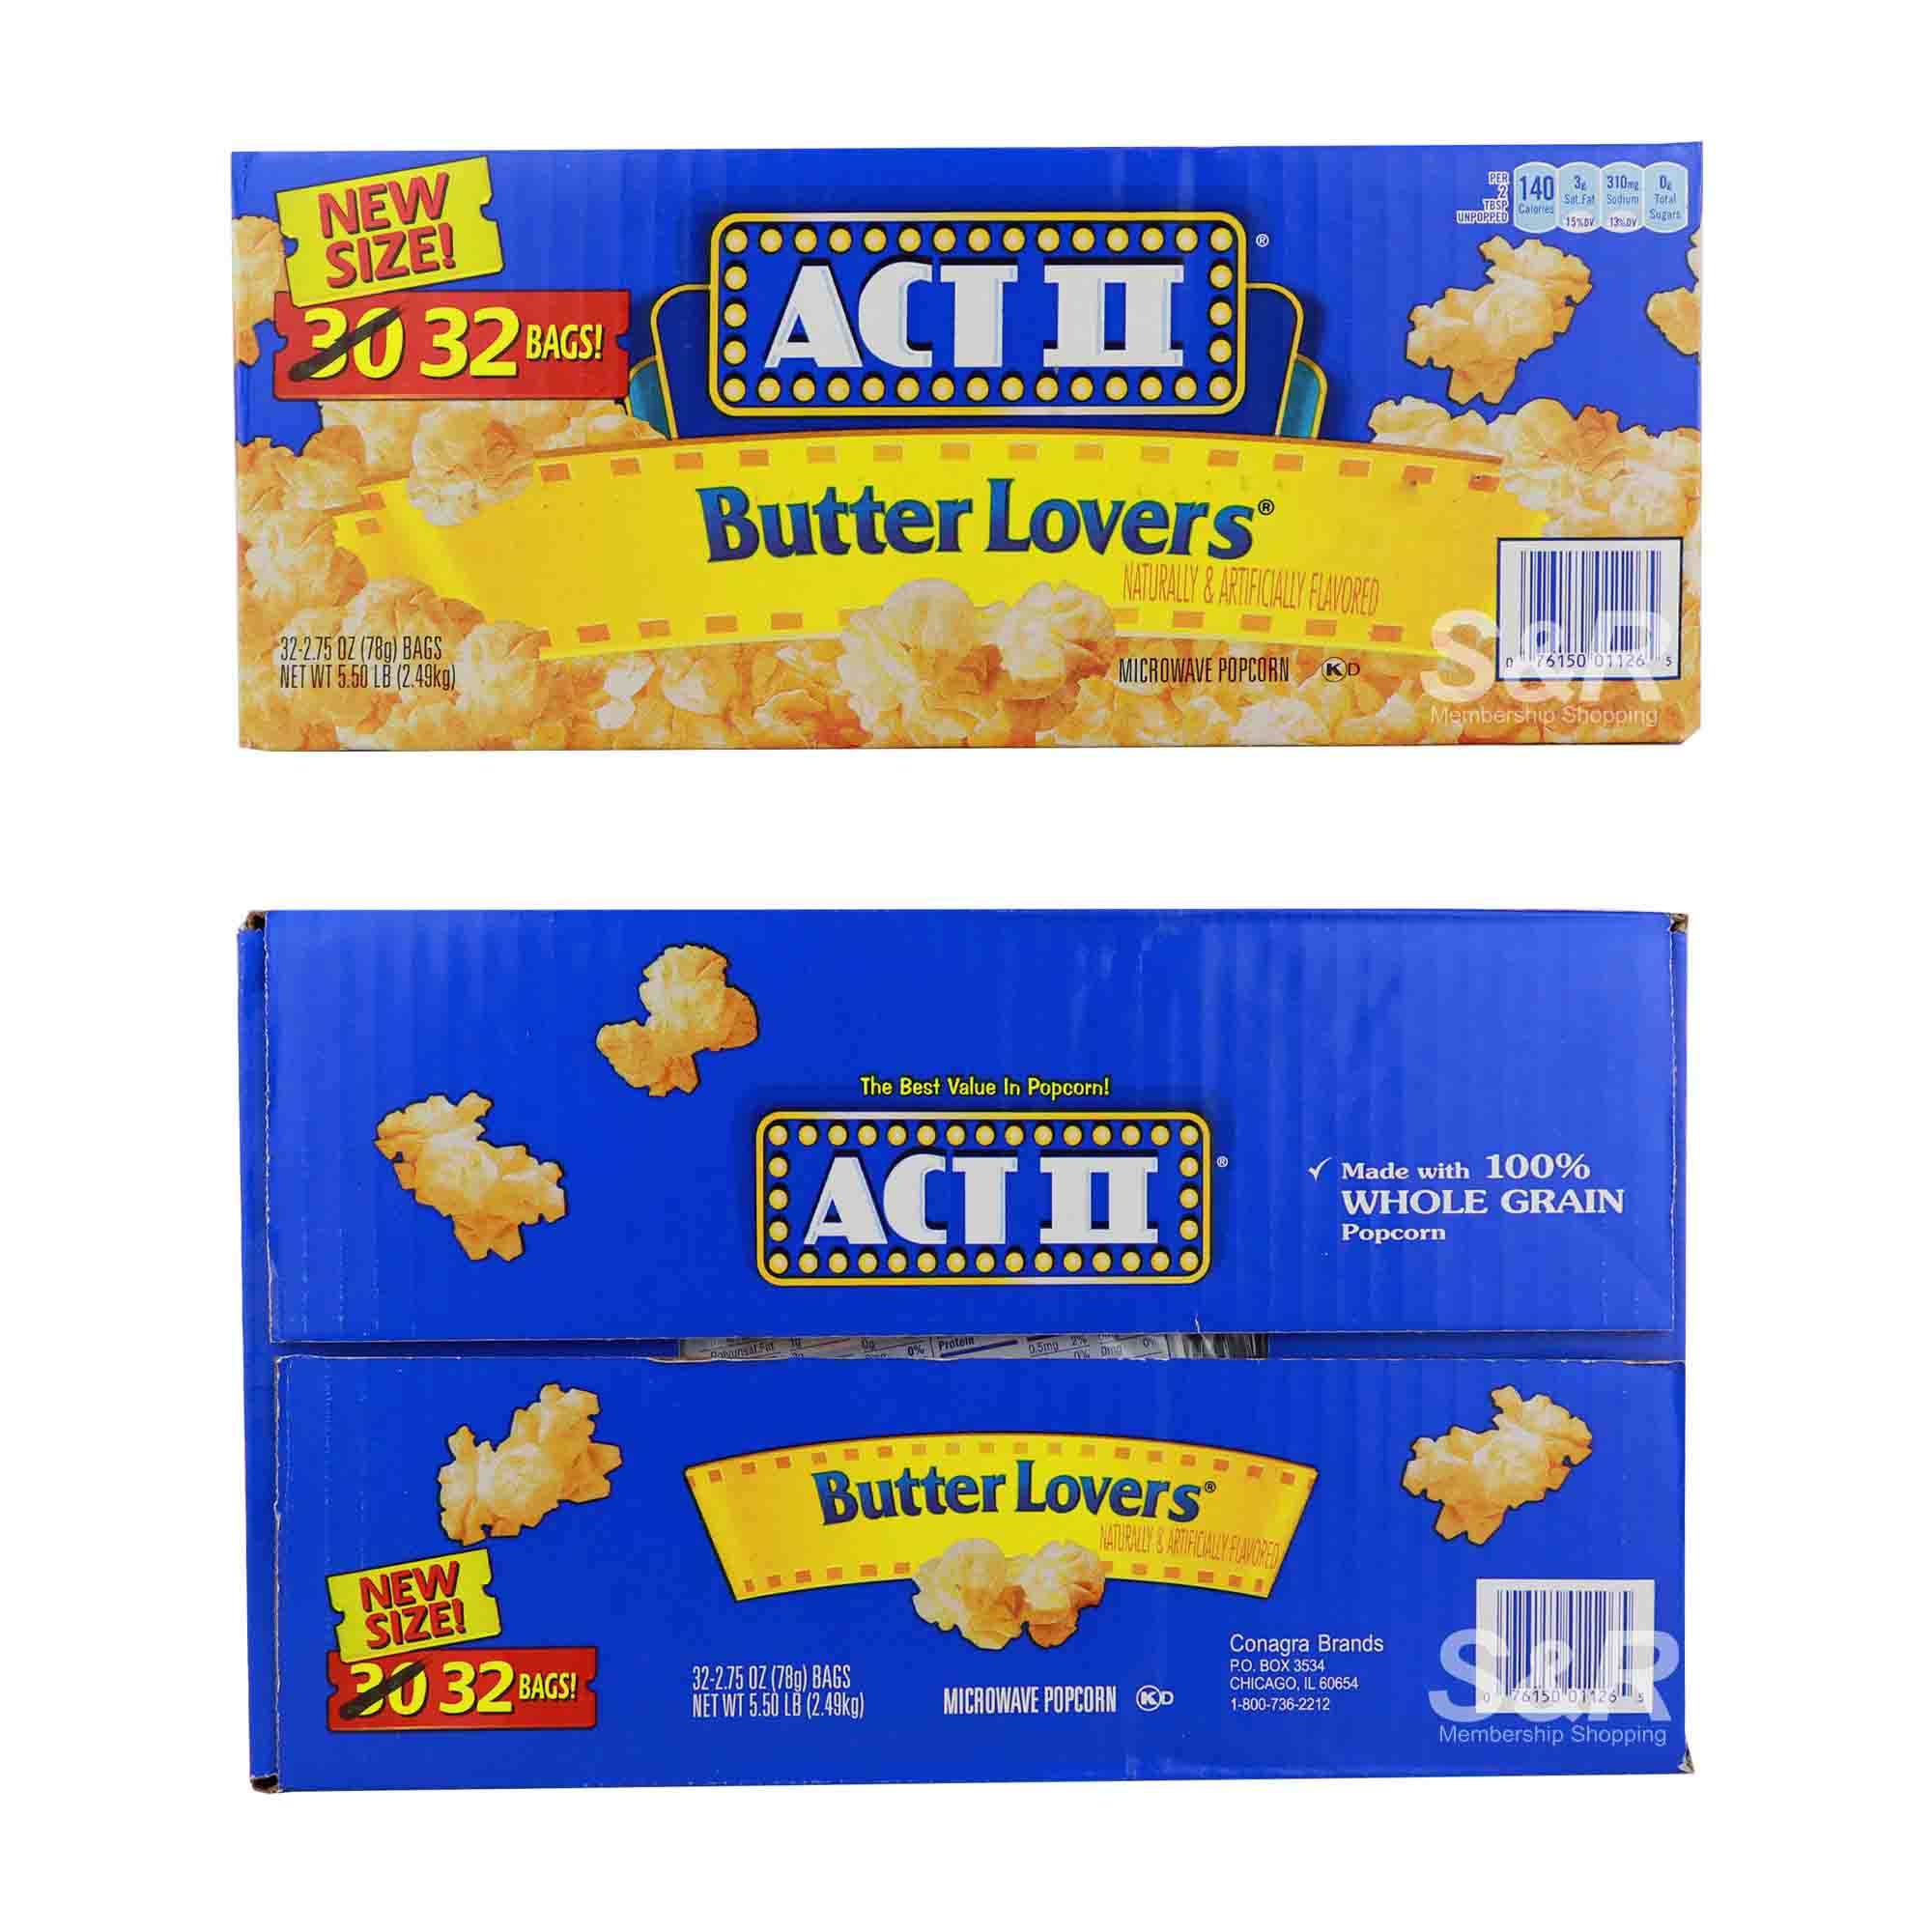 Butter-flavored popcorn